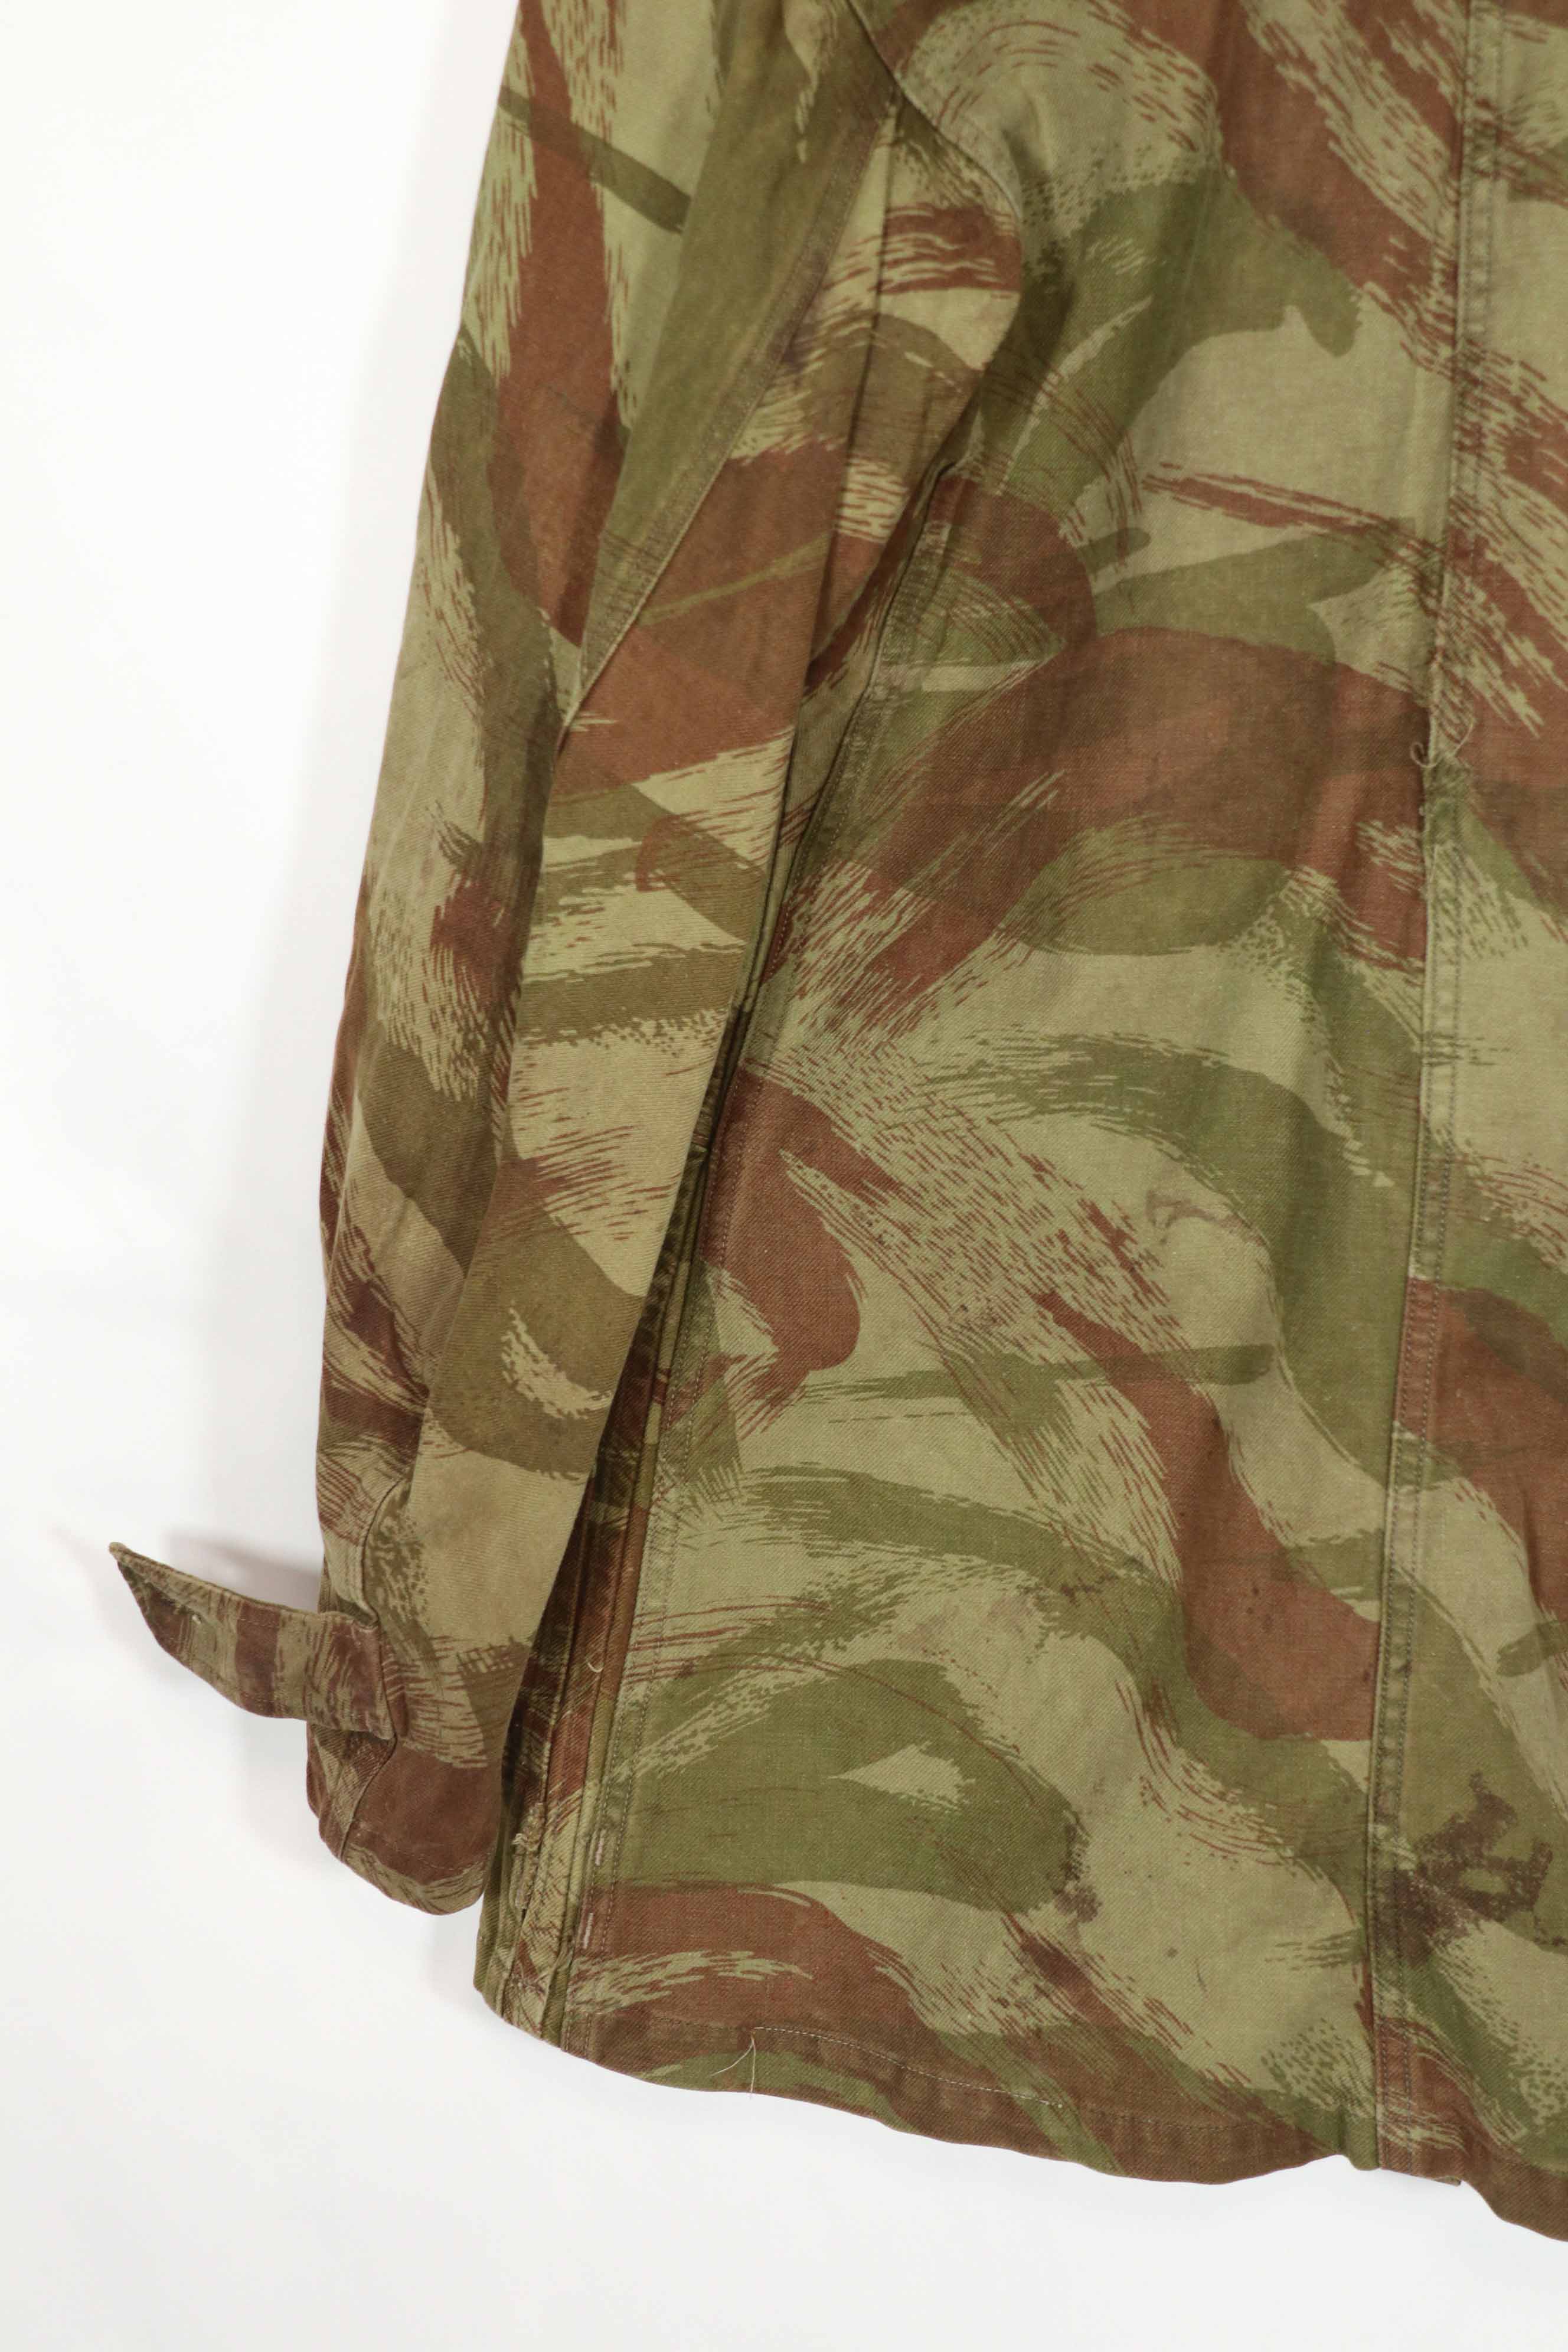 Real Indochina War Lizard Camouflage TAP 47/53 Camouflage Jacket, used, faded.